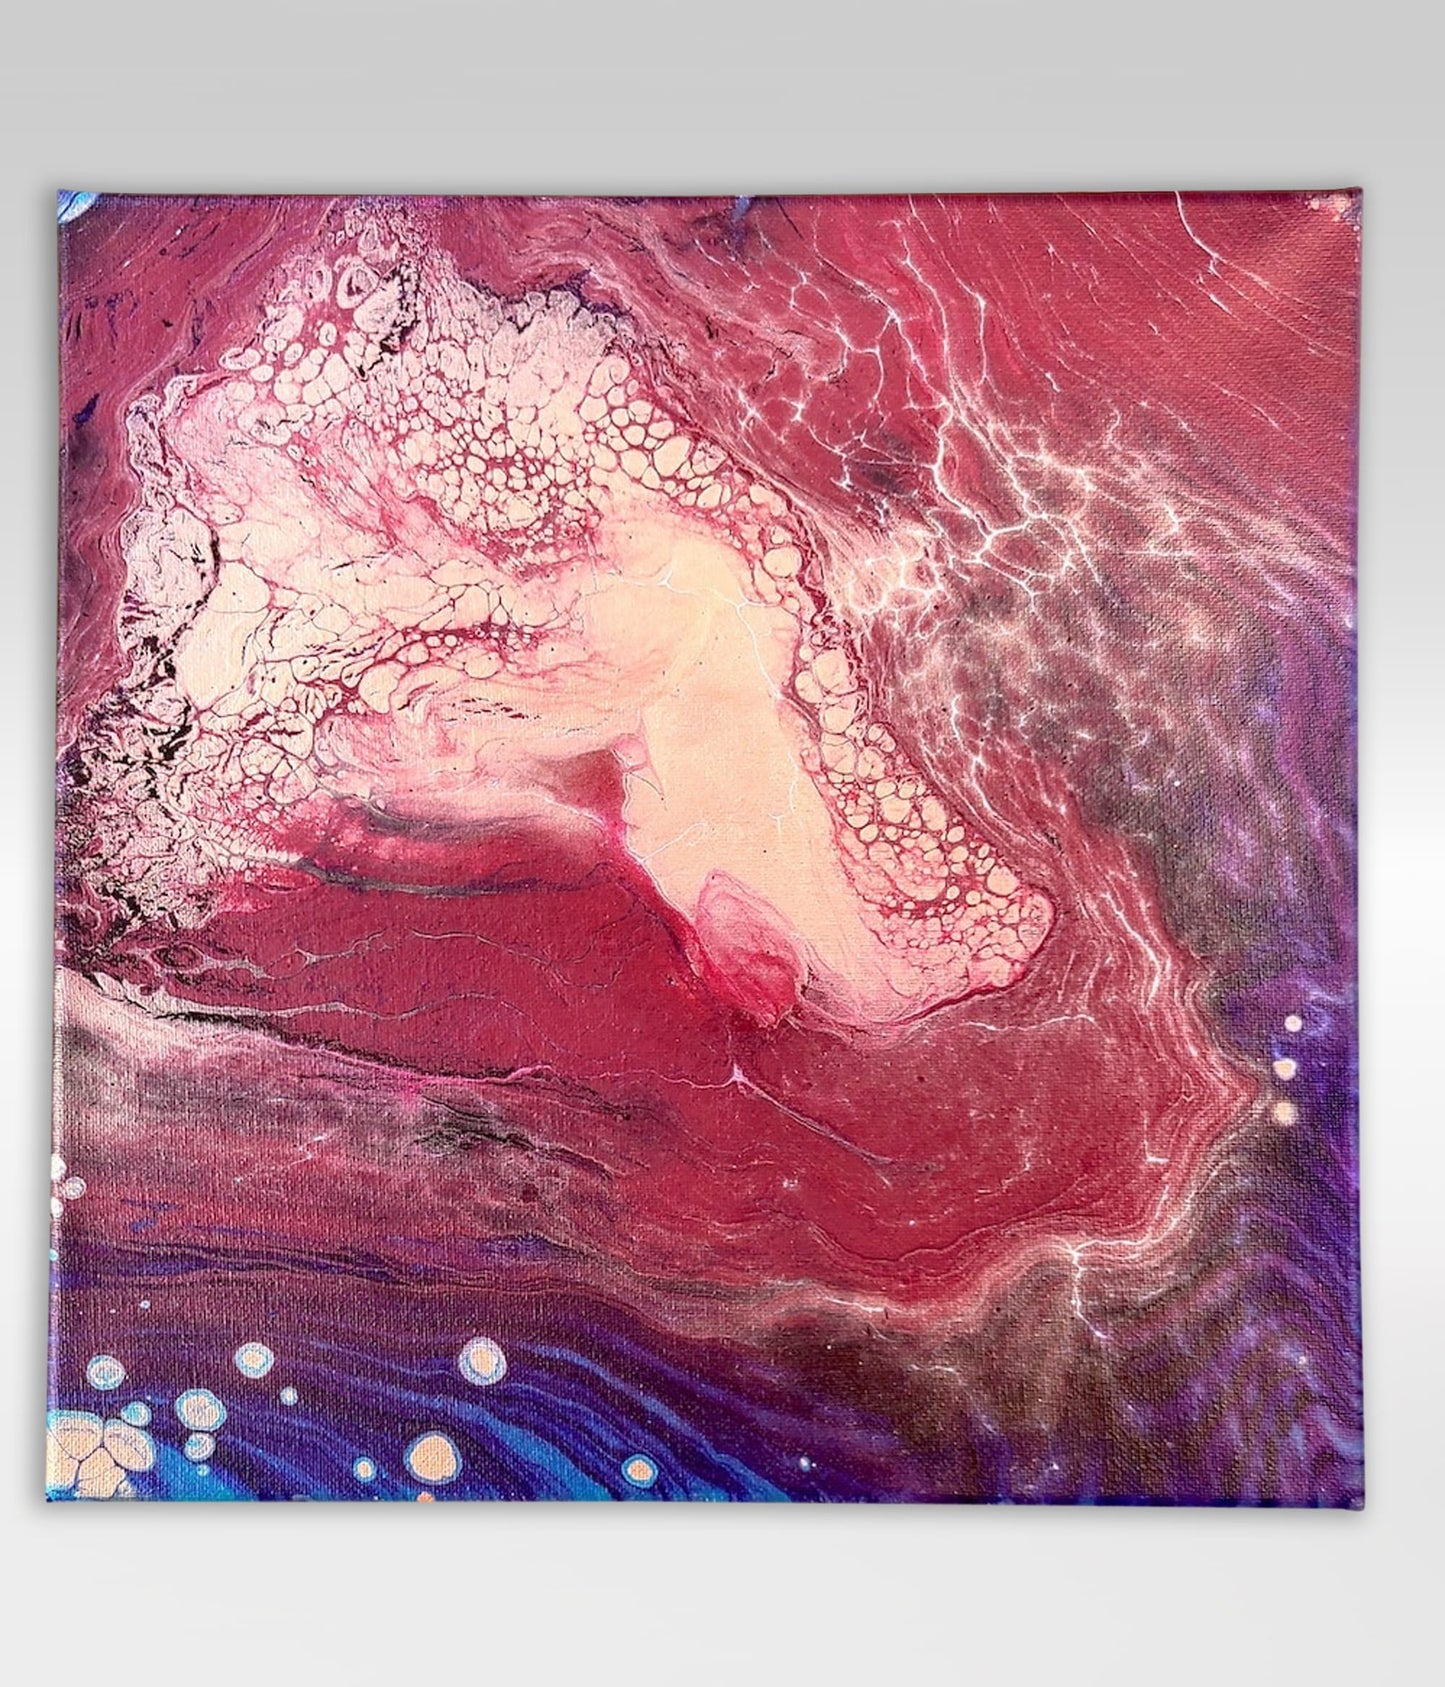 Cuddle Time – 12 x 12 Acrylic Pour Painting On Canvas